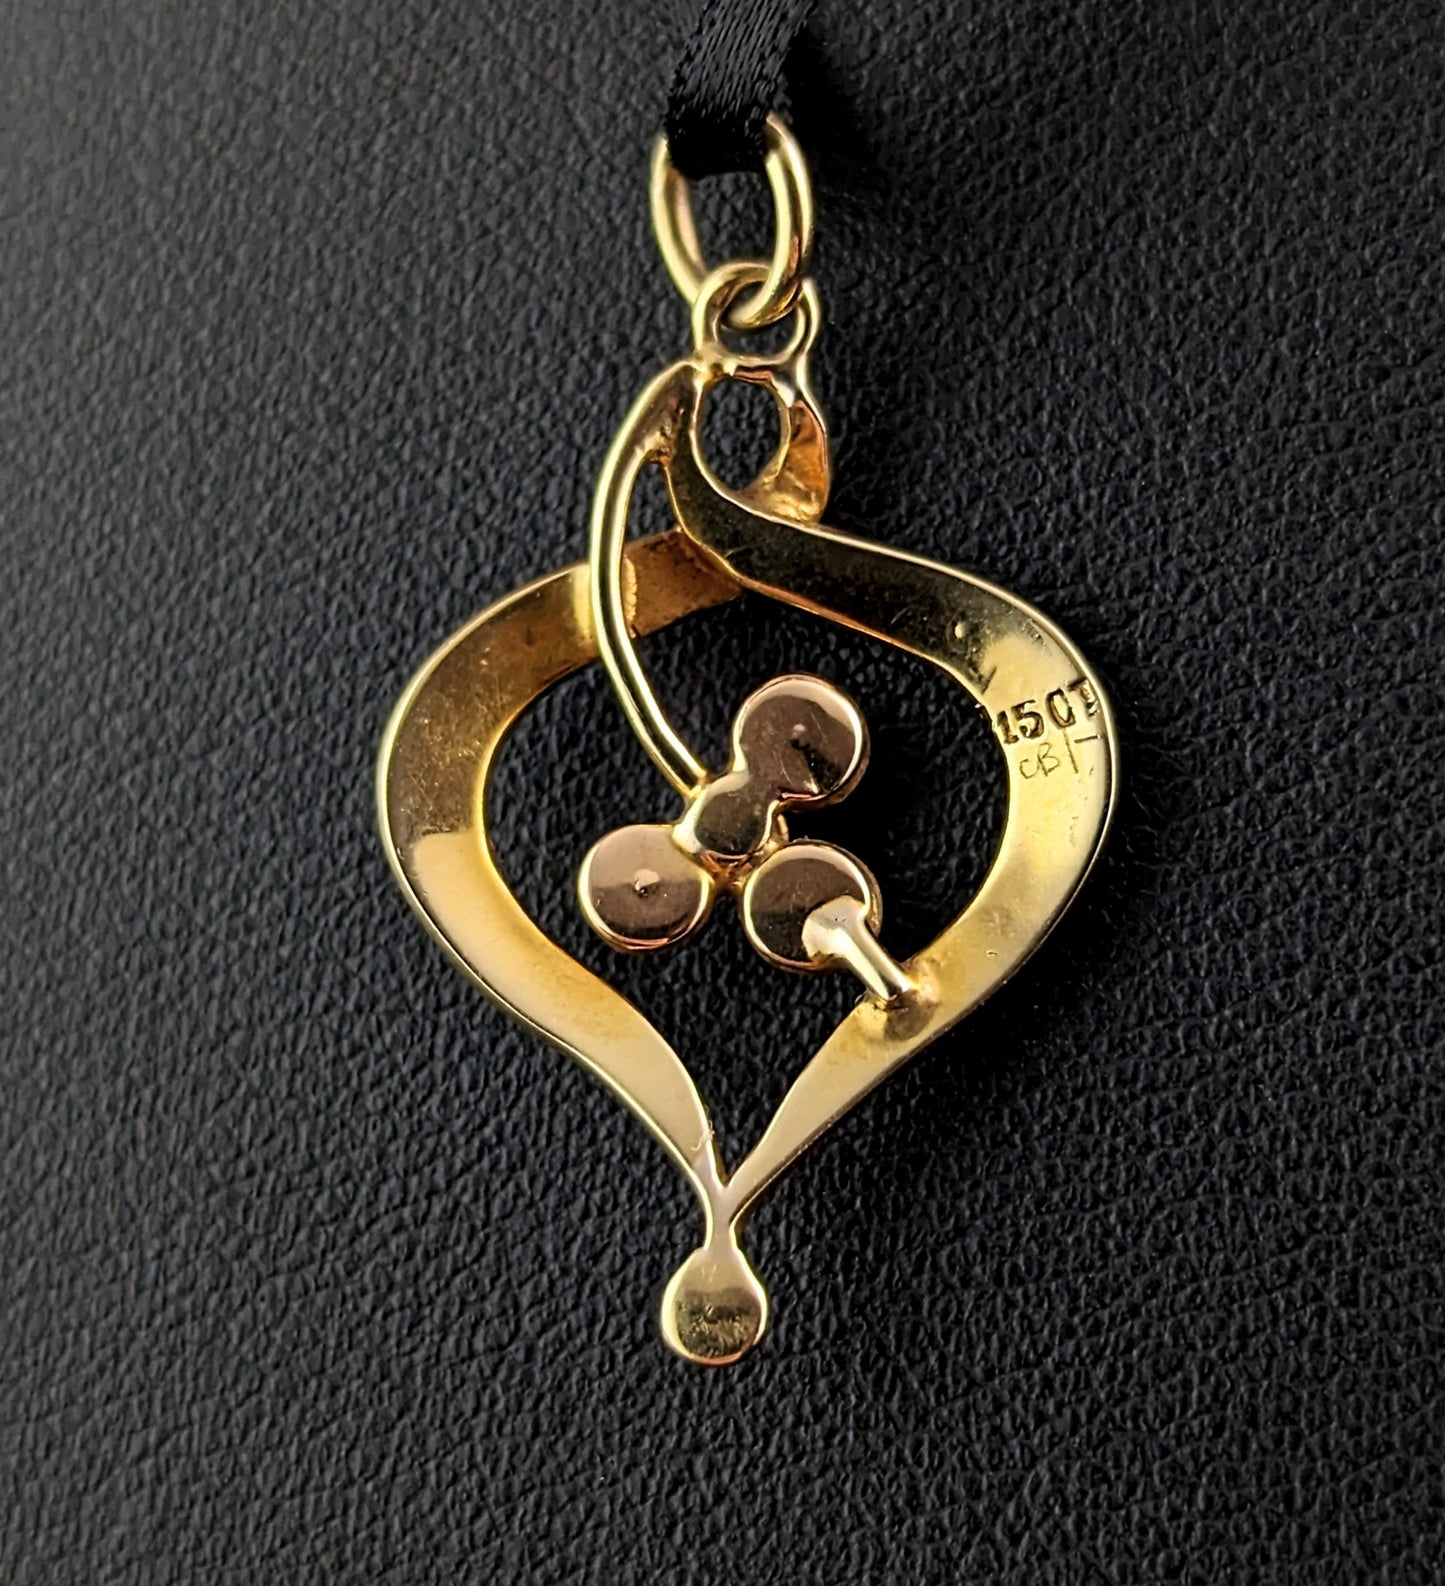 Antique 15ct gold Turquoise and Pearl shamrock pendant